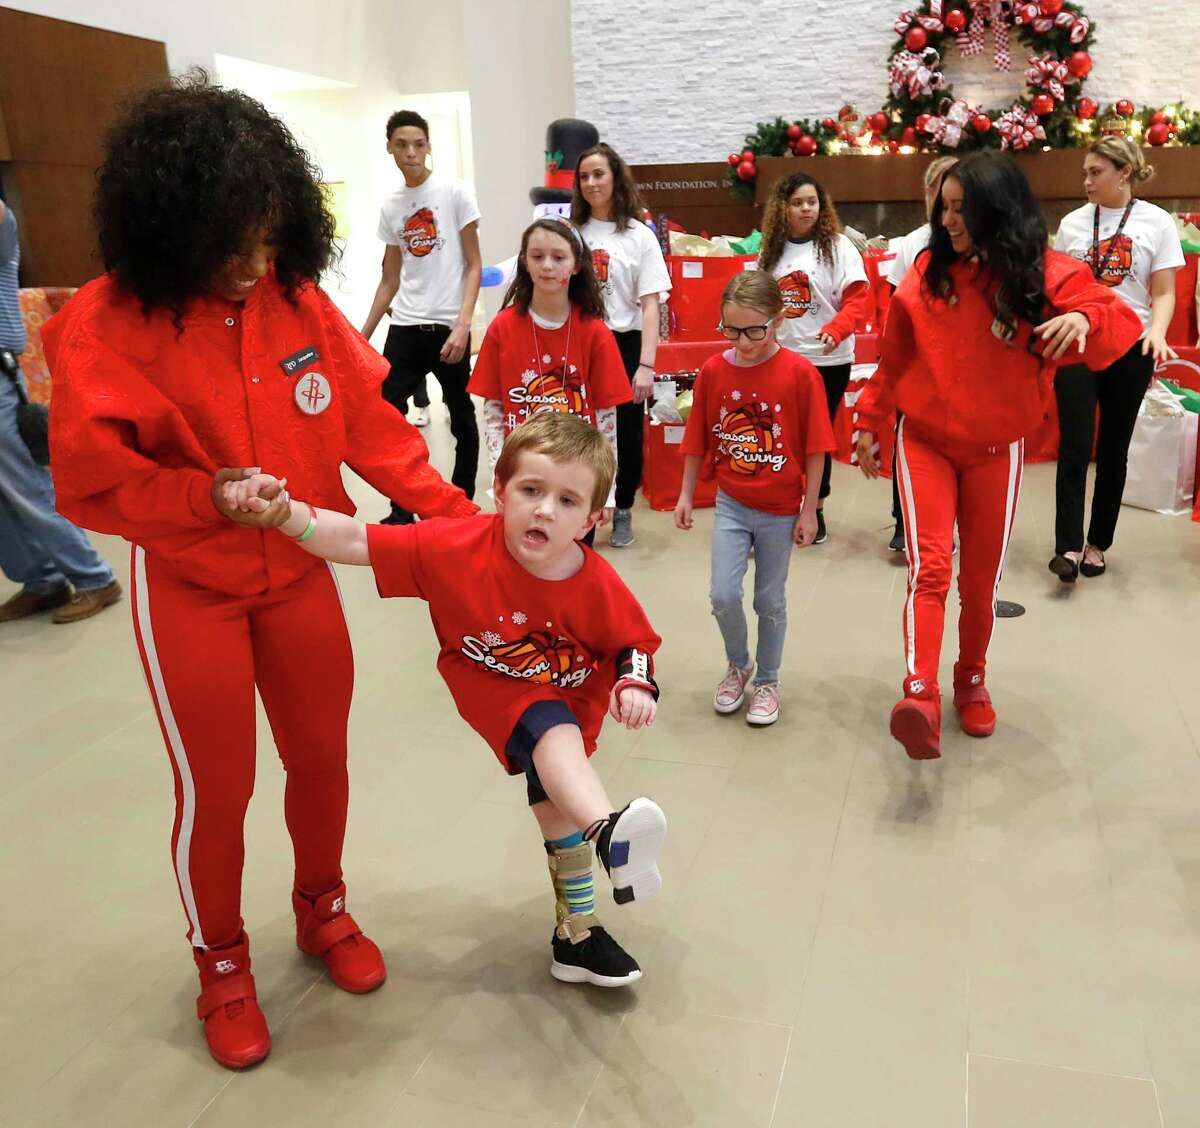 John Weekley, 4, dances with a Rockets Power Dancer before guard Eric Gordon and former player Carl Herrera hand out gifts to him and other children staying at the Ronald McDonald House. The Rockets and Southwest Airlines partnered to host a holiday party for seriously ill children being treated in the Texas Medical Center.